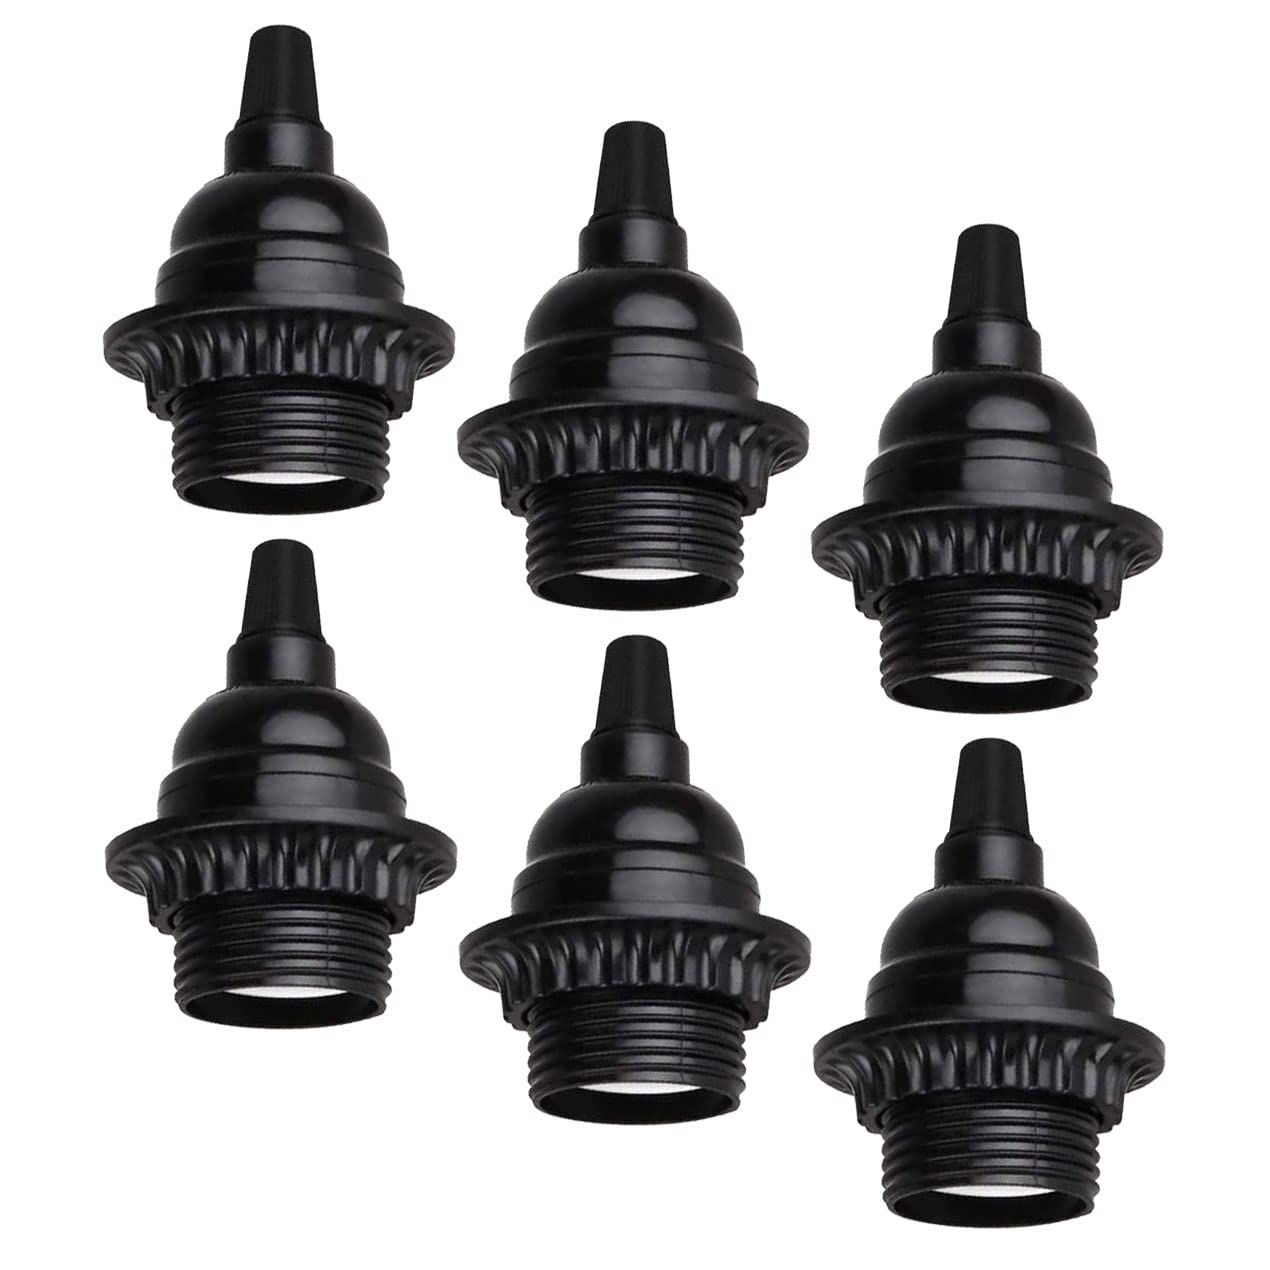 6er/Pack Vintage E26 Bulb Socket - Black Edison Lamp Holder Socket Replacement for DIY Projects Fittings Heat Resistant Light Lamp Parts Kits for Table Lamp Pendants Light Repair Do It Yourself